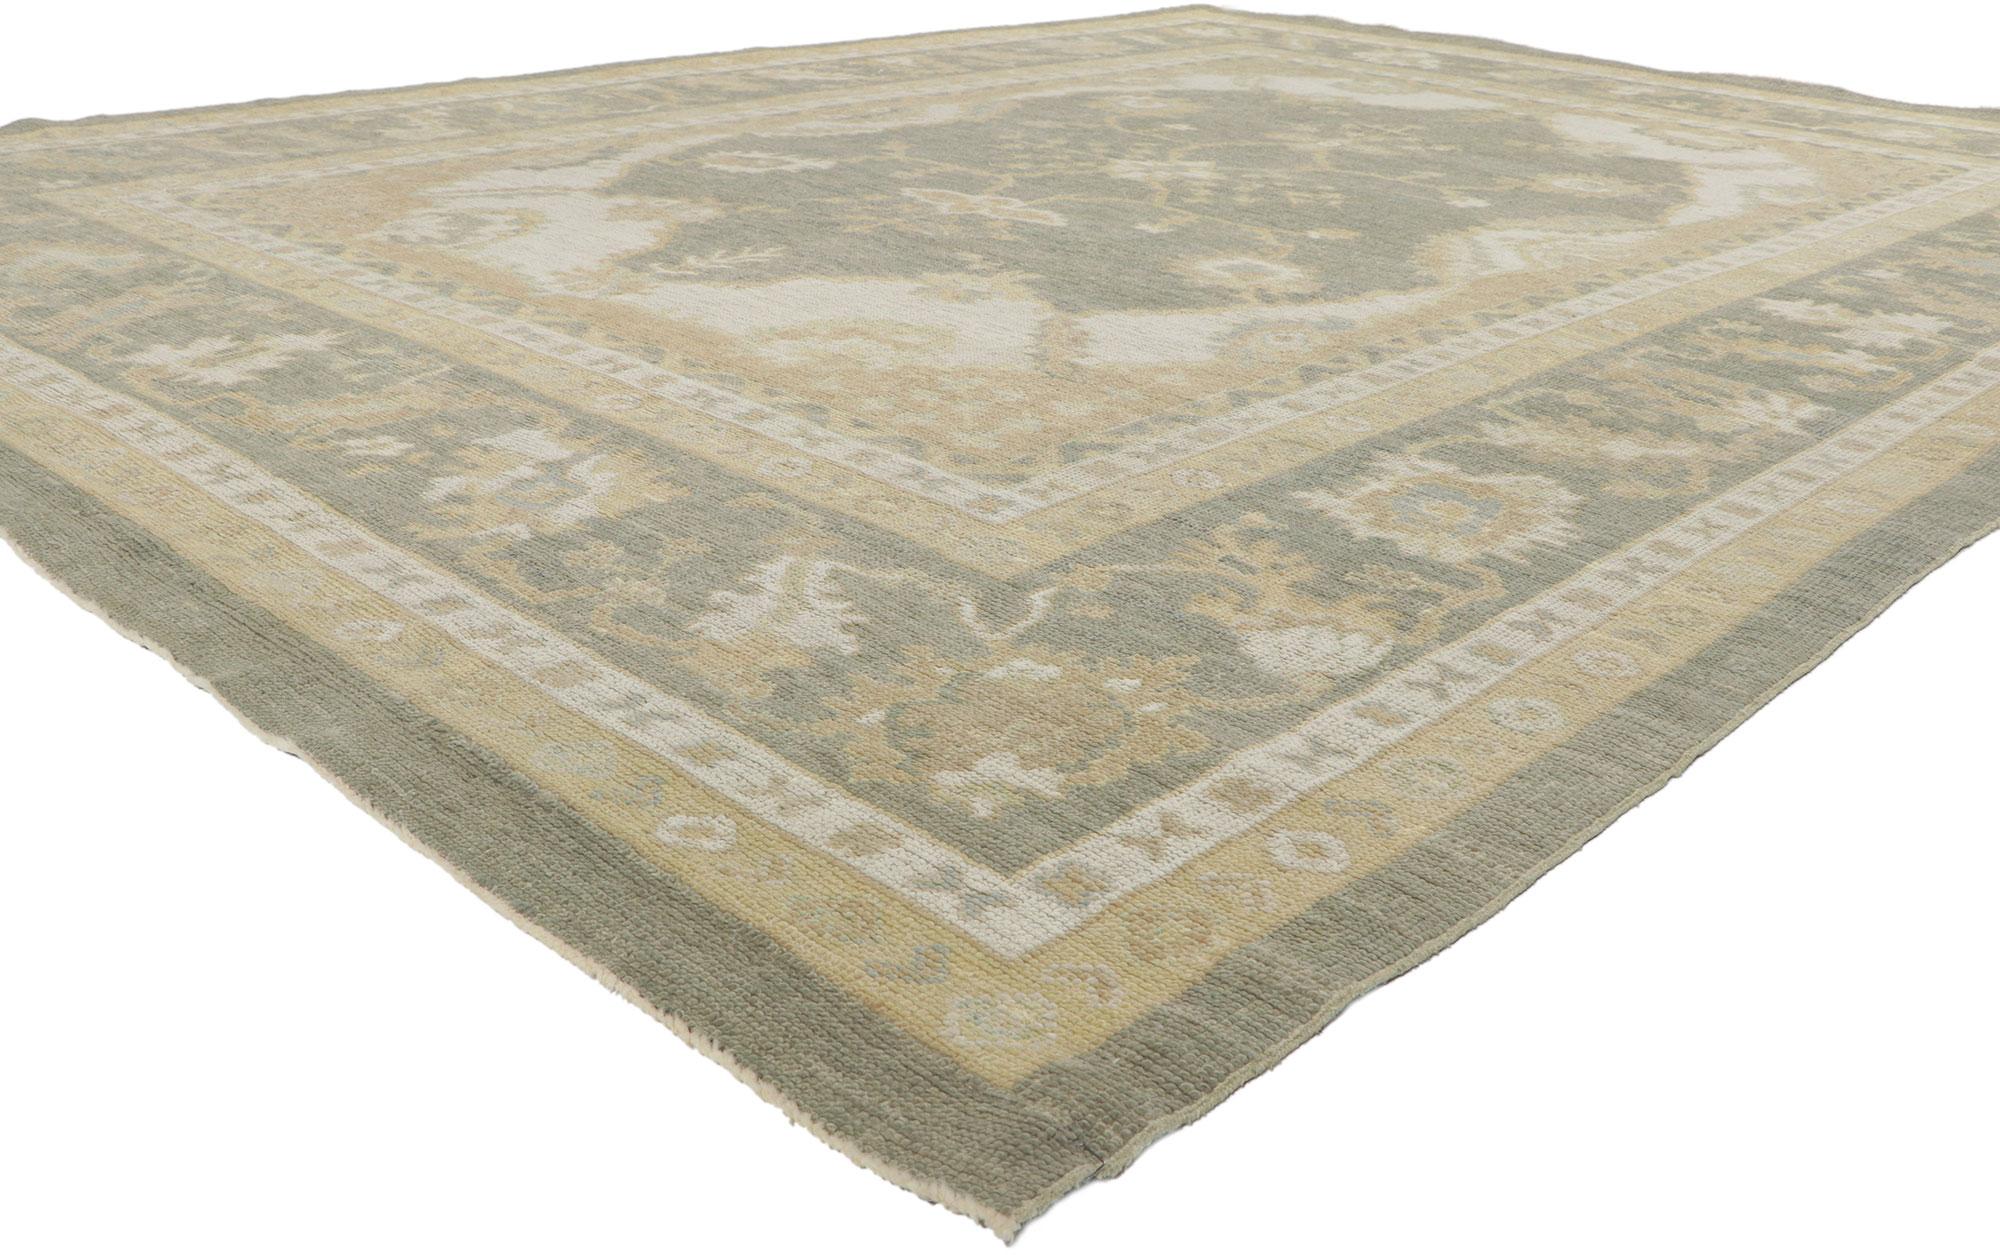 80973 New Contemporary Oushak rug, measures: 09'05 x 12'05.